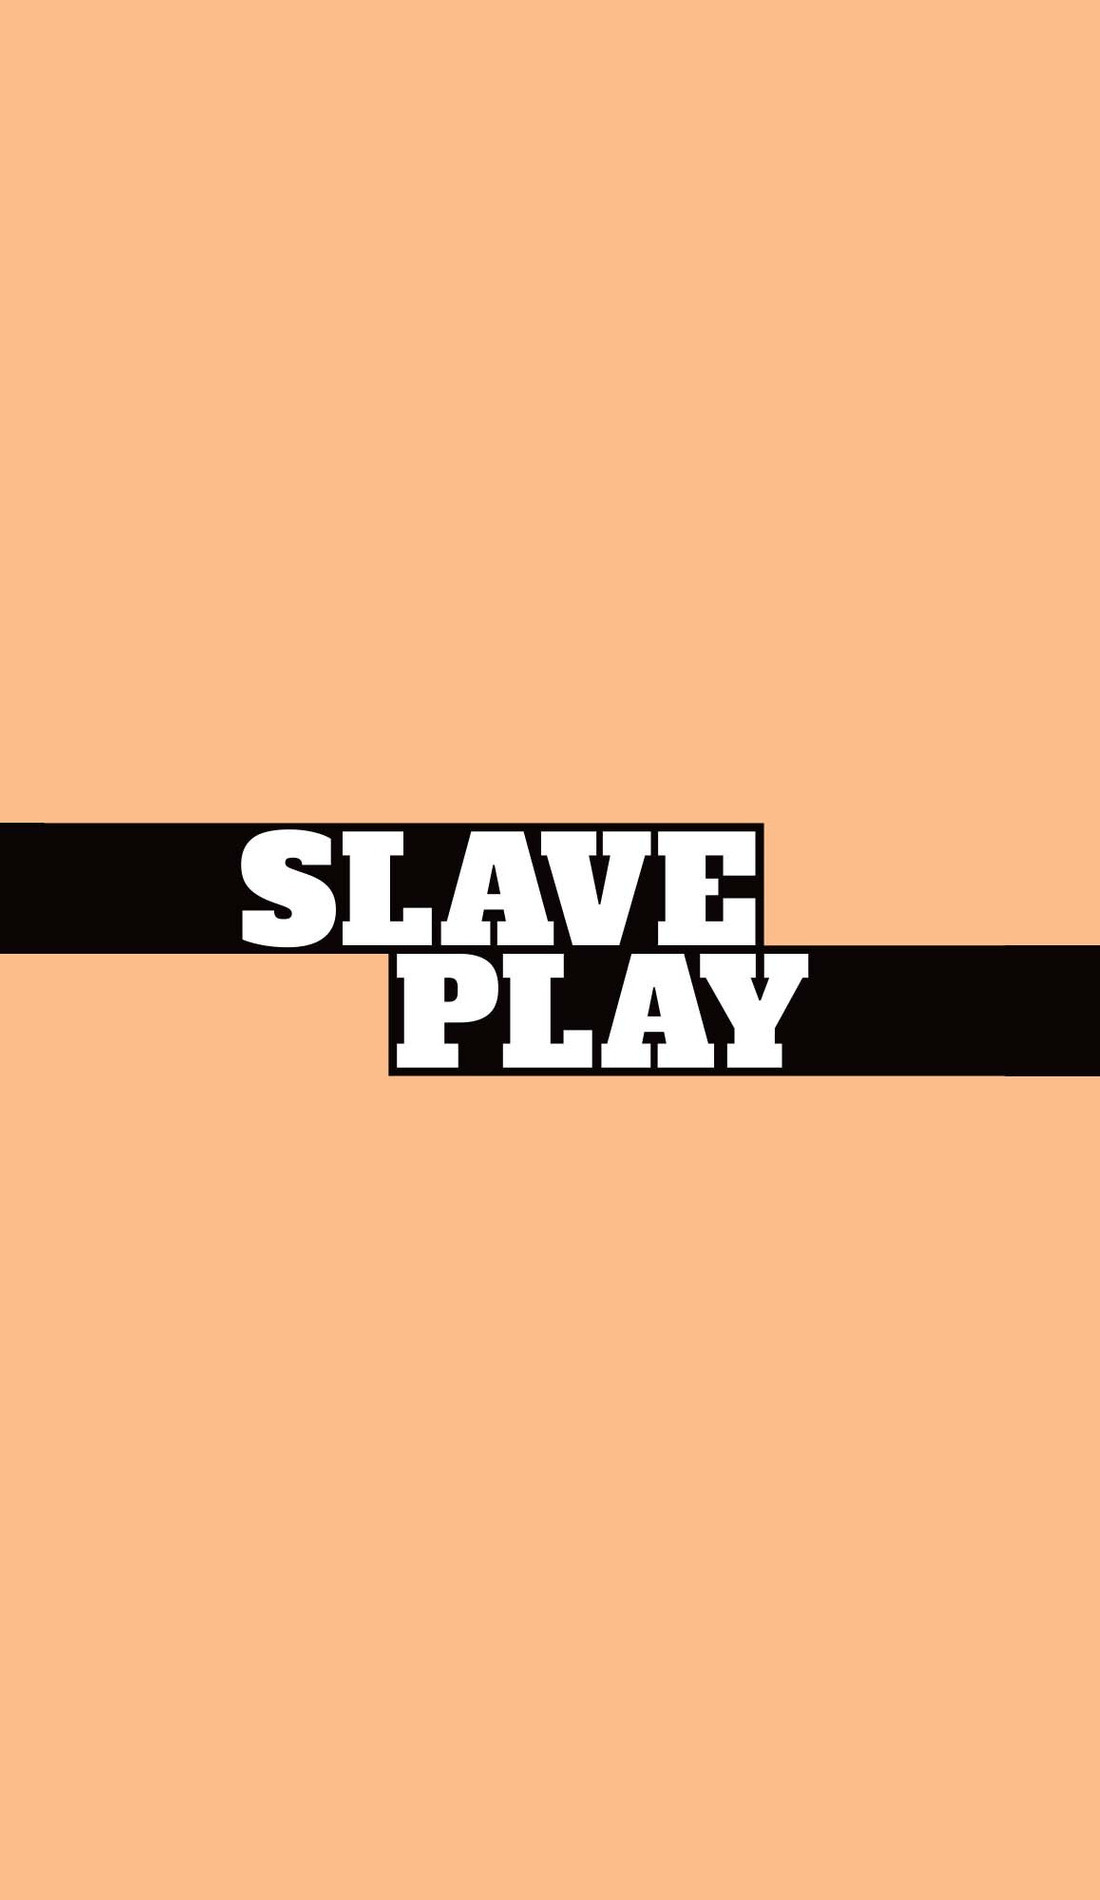 A Slave Play live event